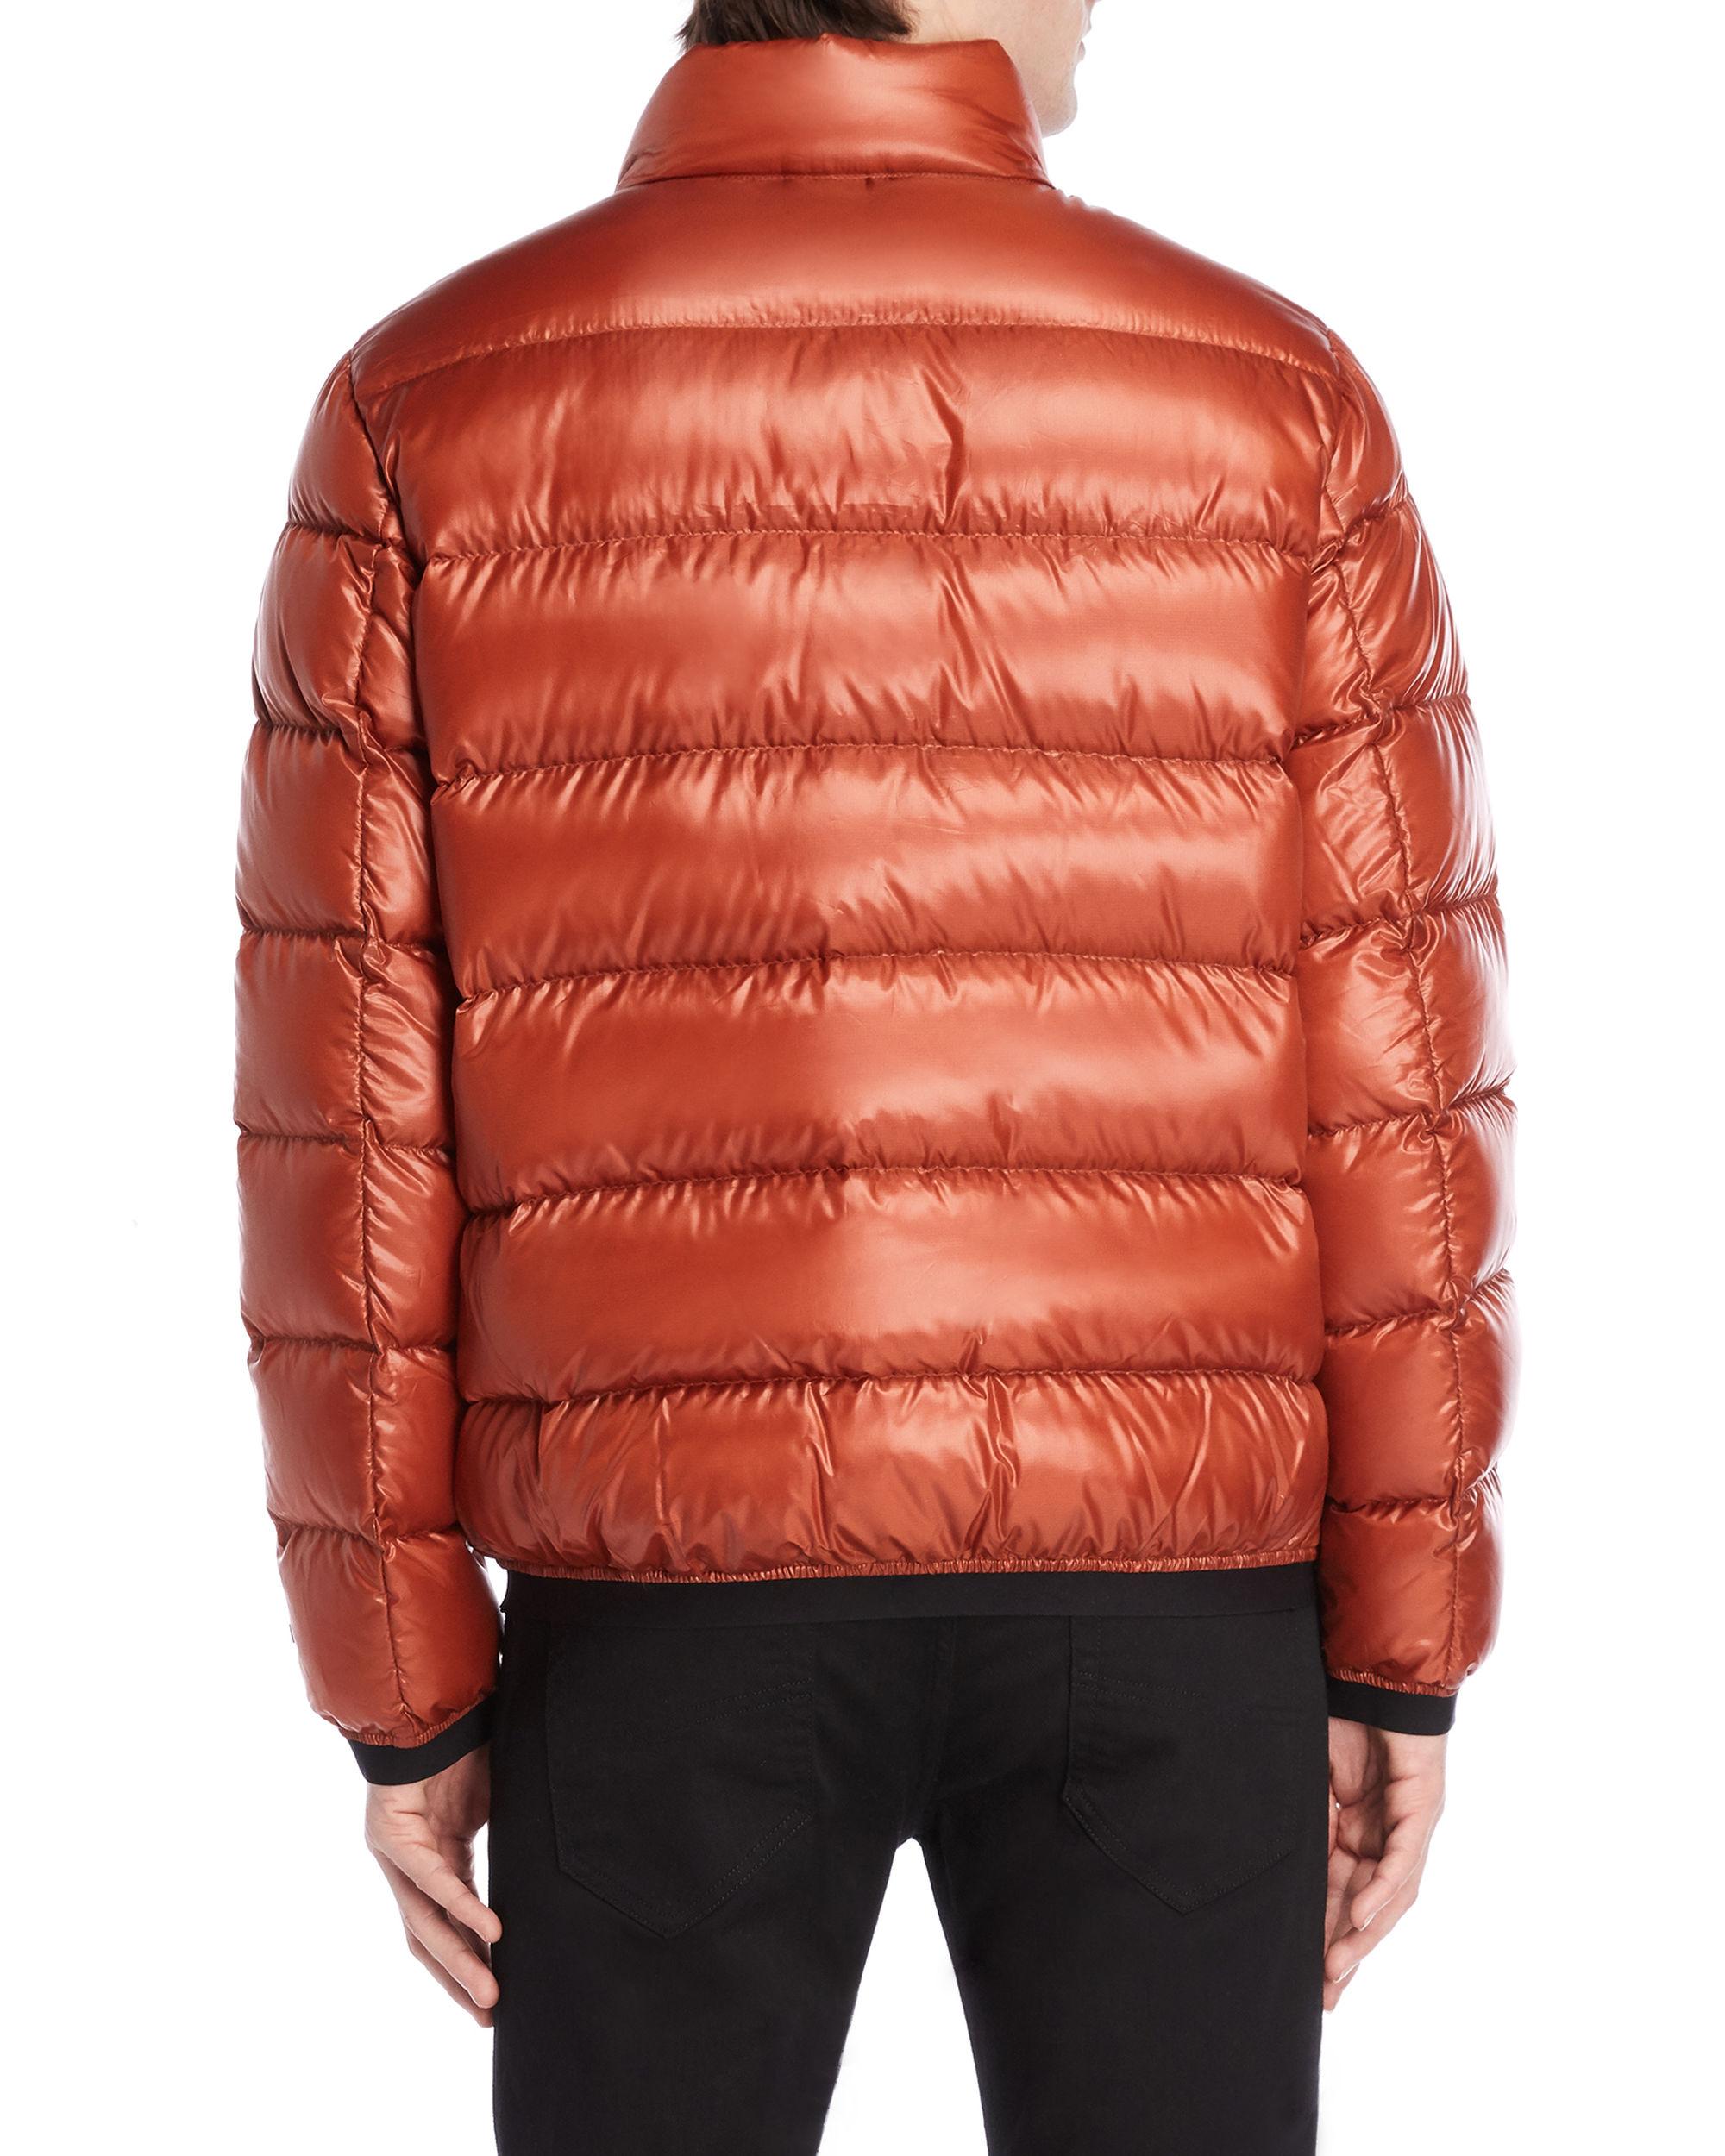 DKNY Synthetic Down Puffer Bomber Jacket in Orange for Men - Lyst